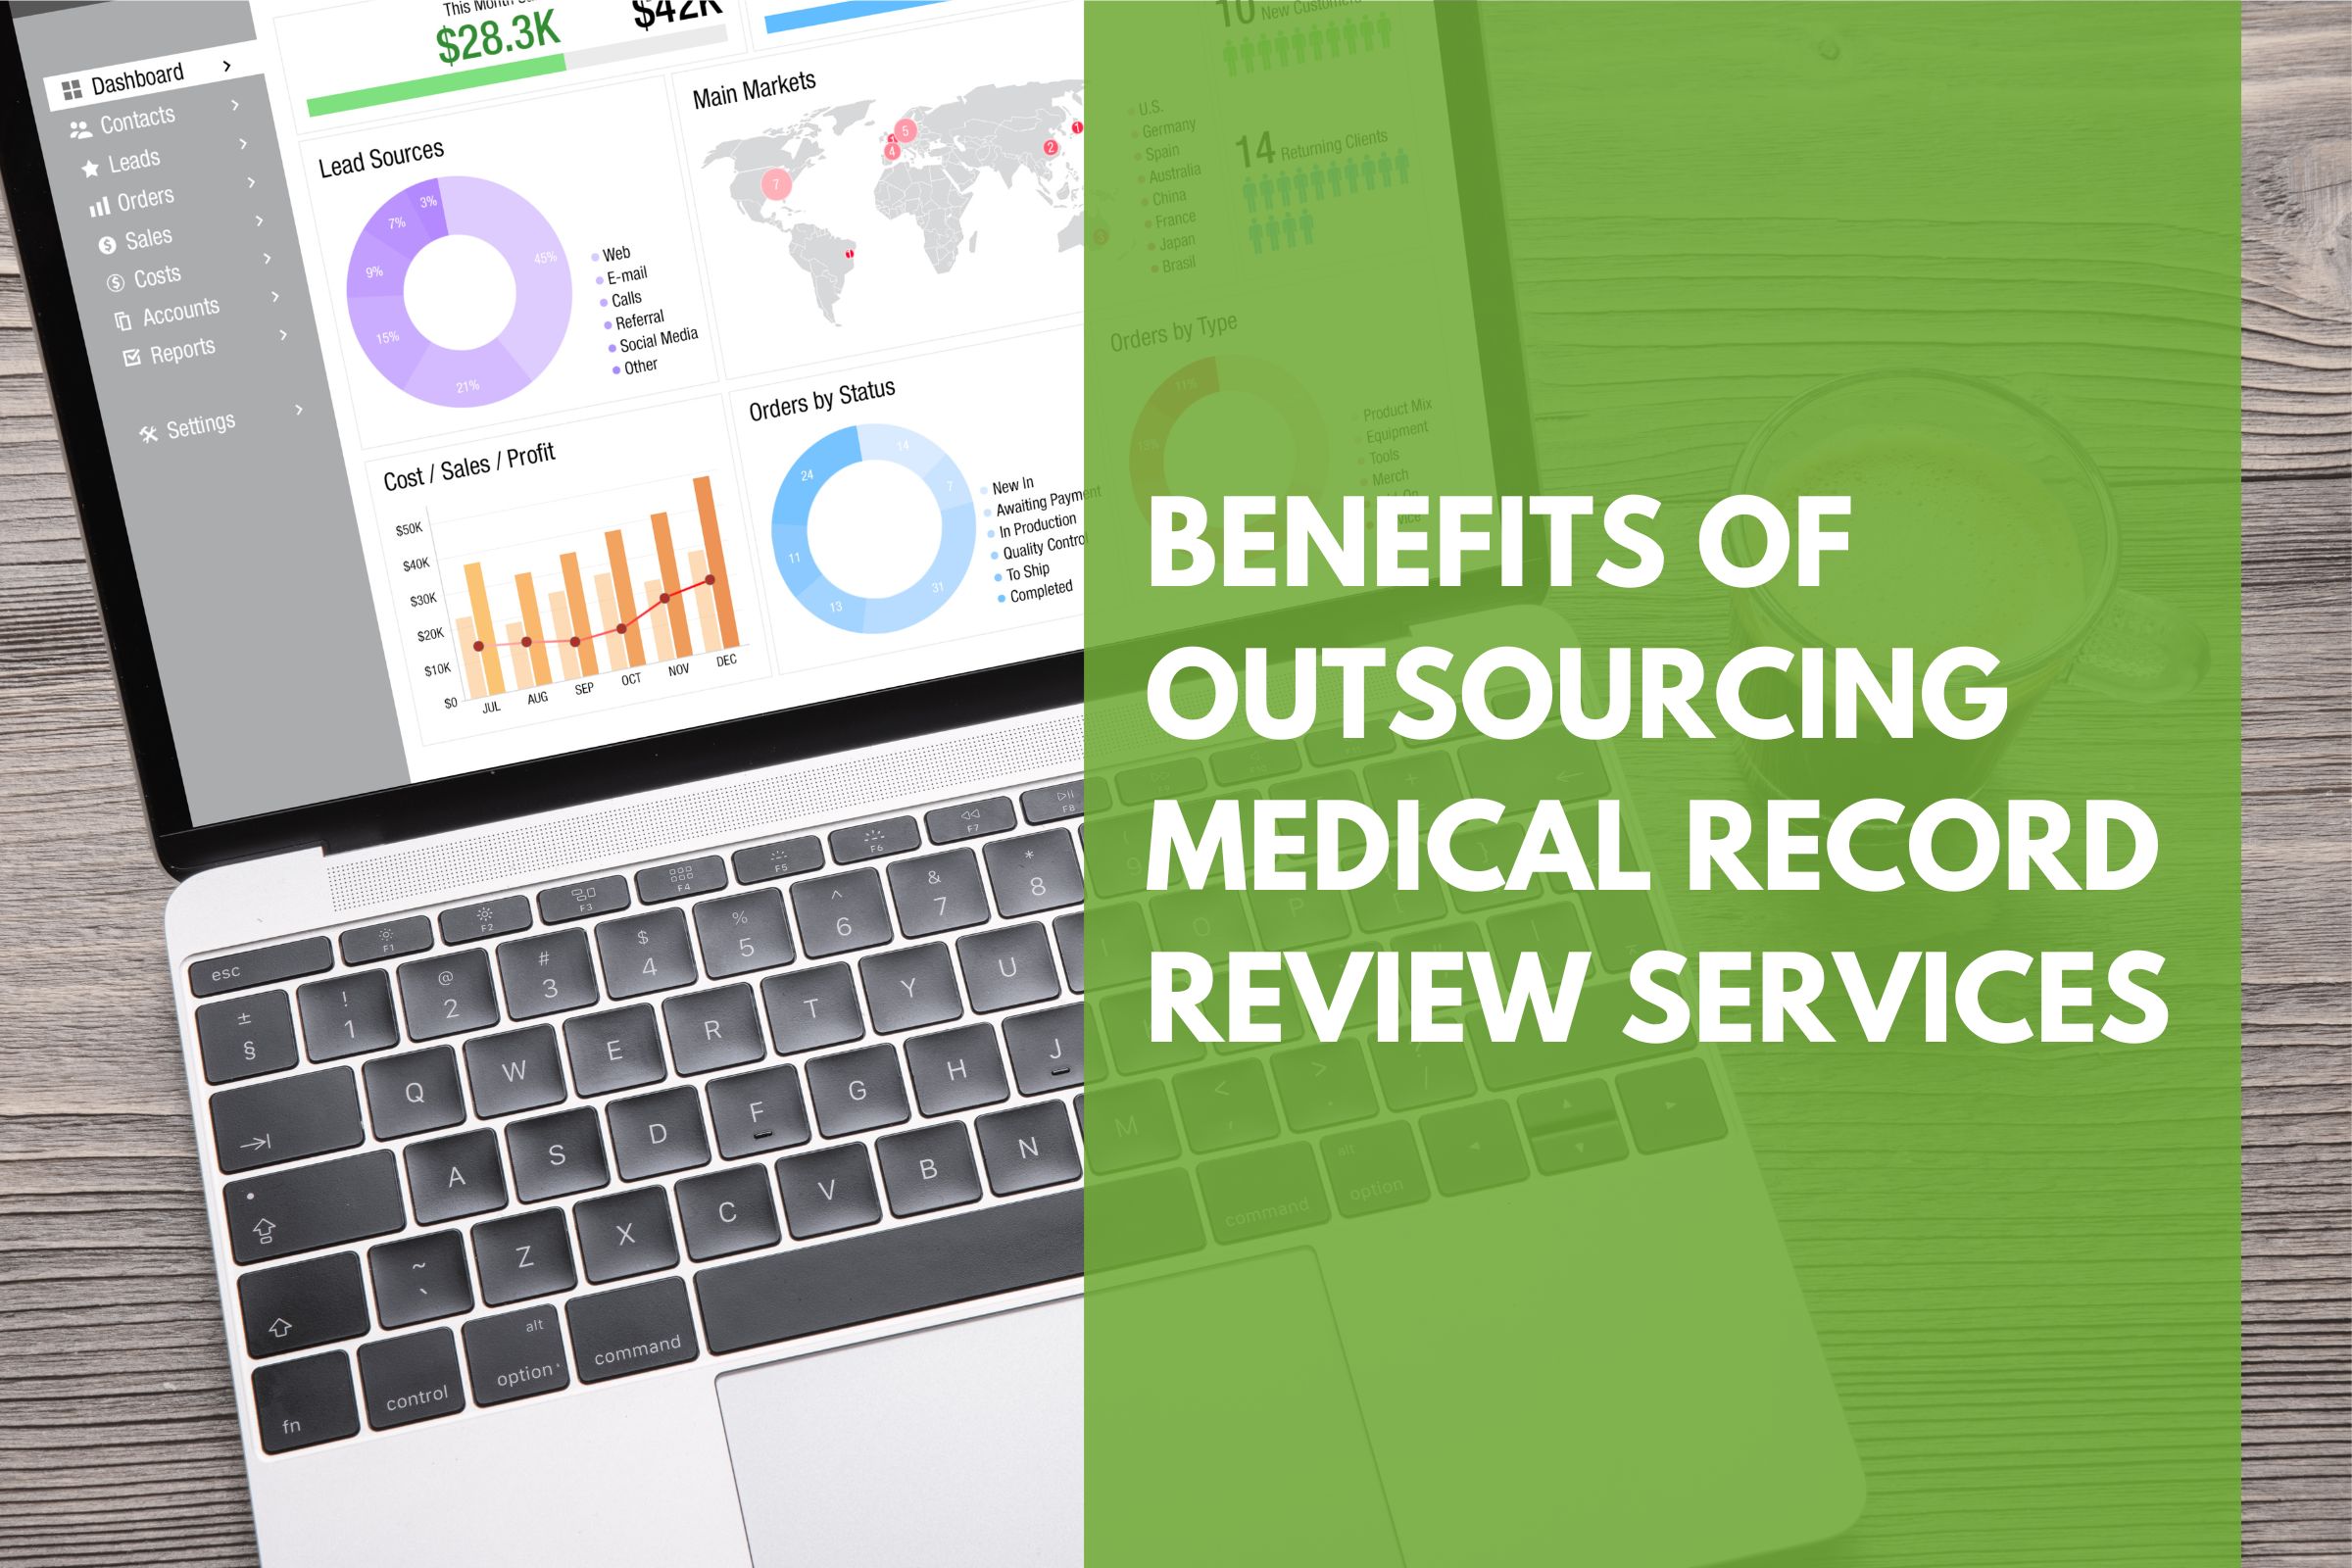 Benefits of Outsourcing Medical Record Review Services